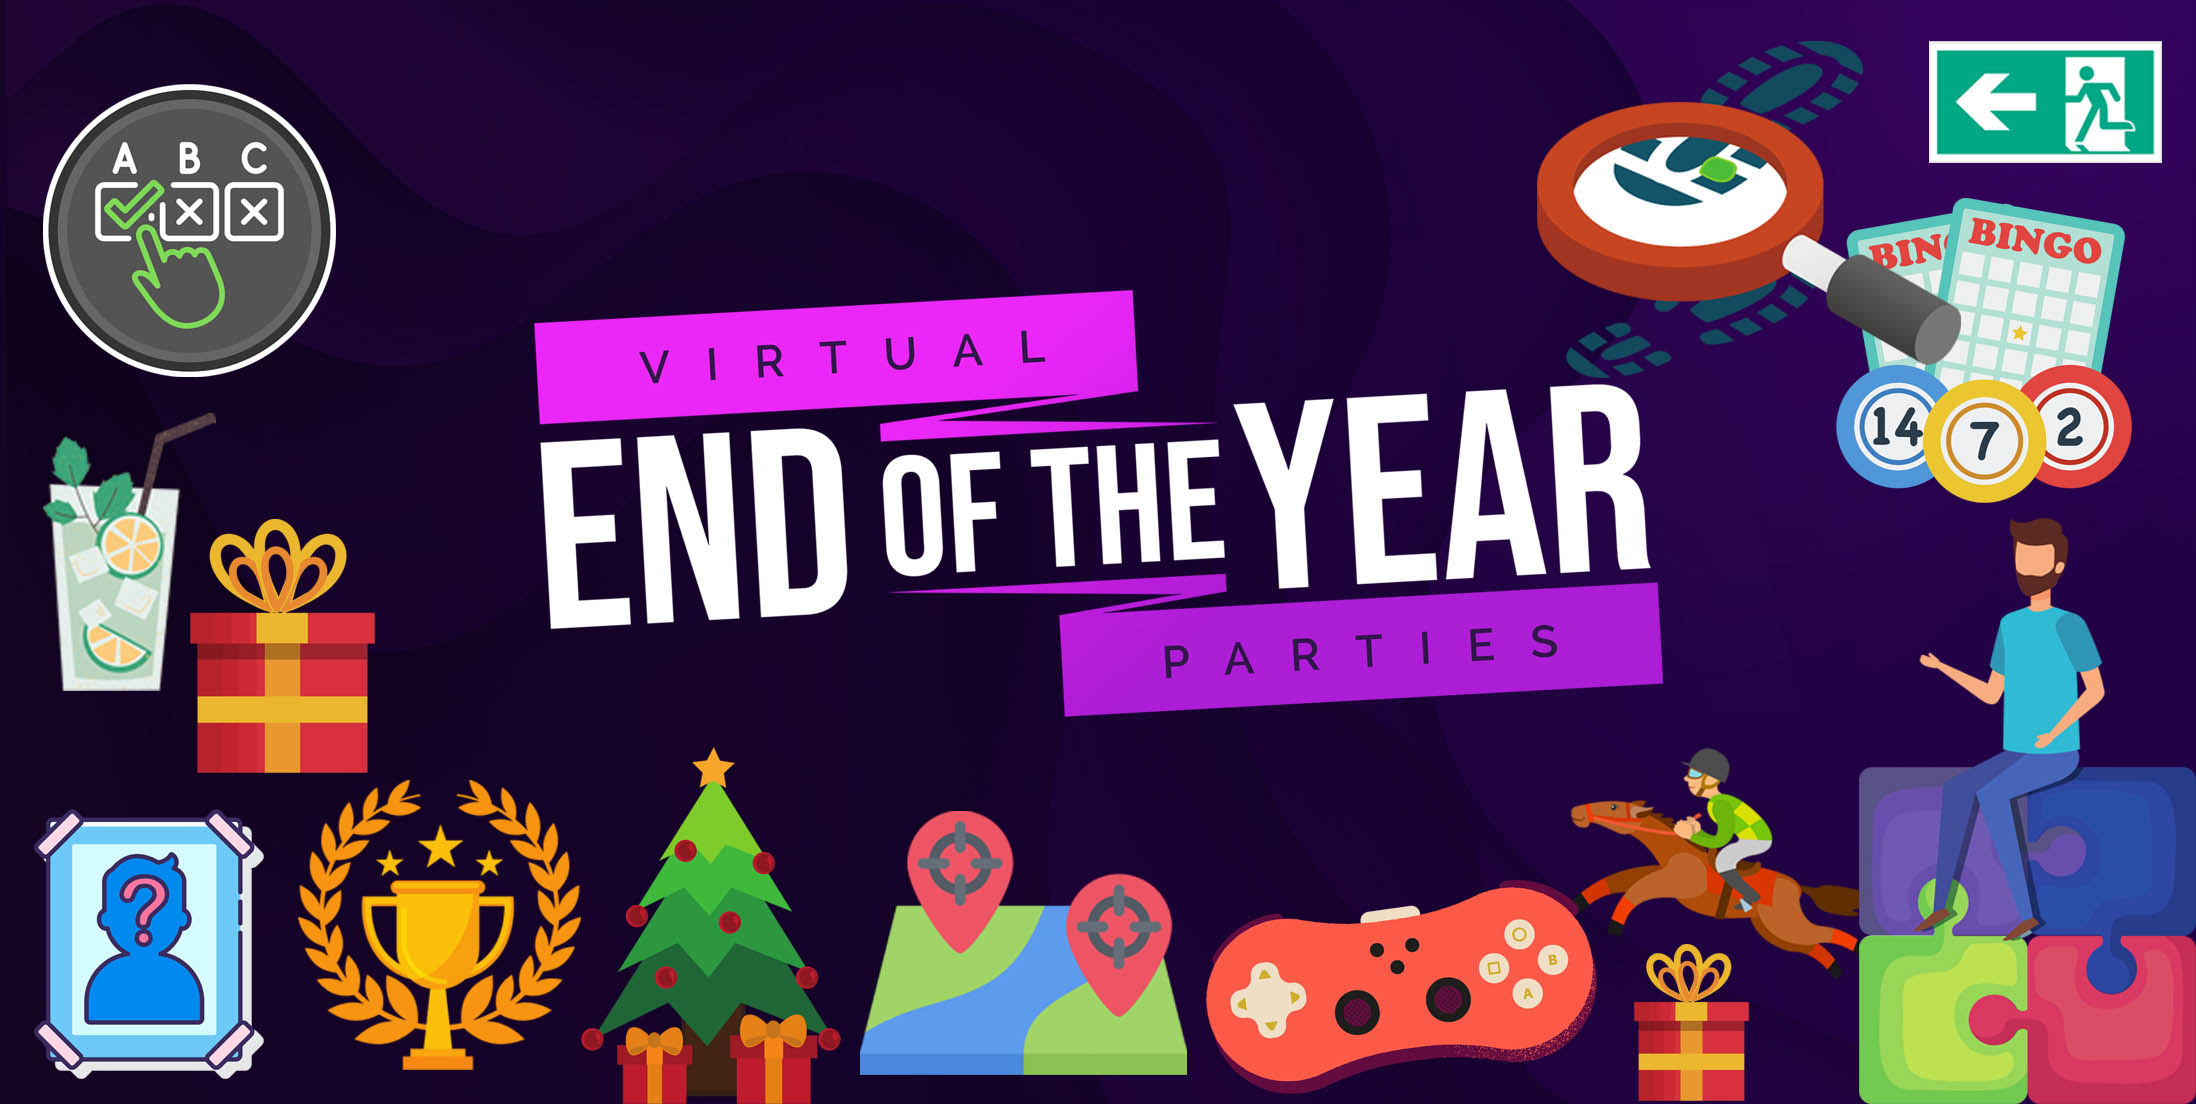 Virtual End of Year Party Party Ideas